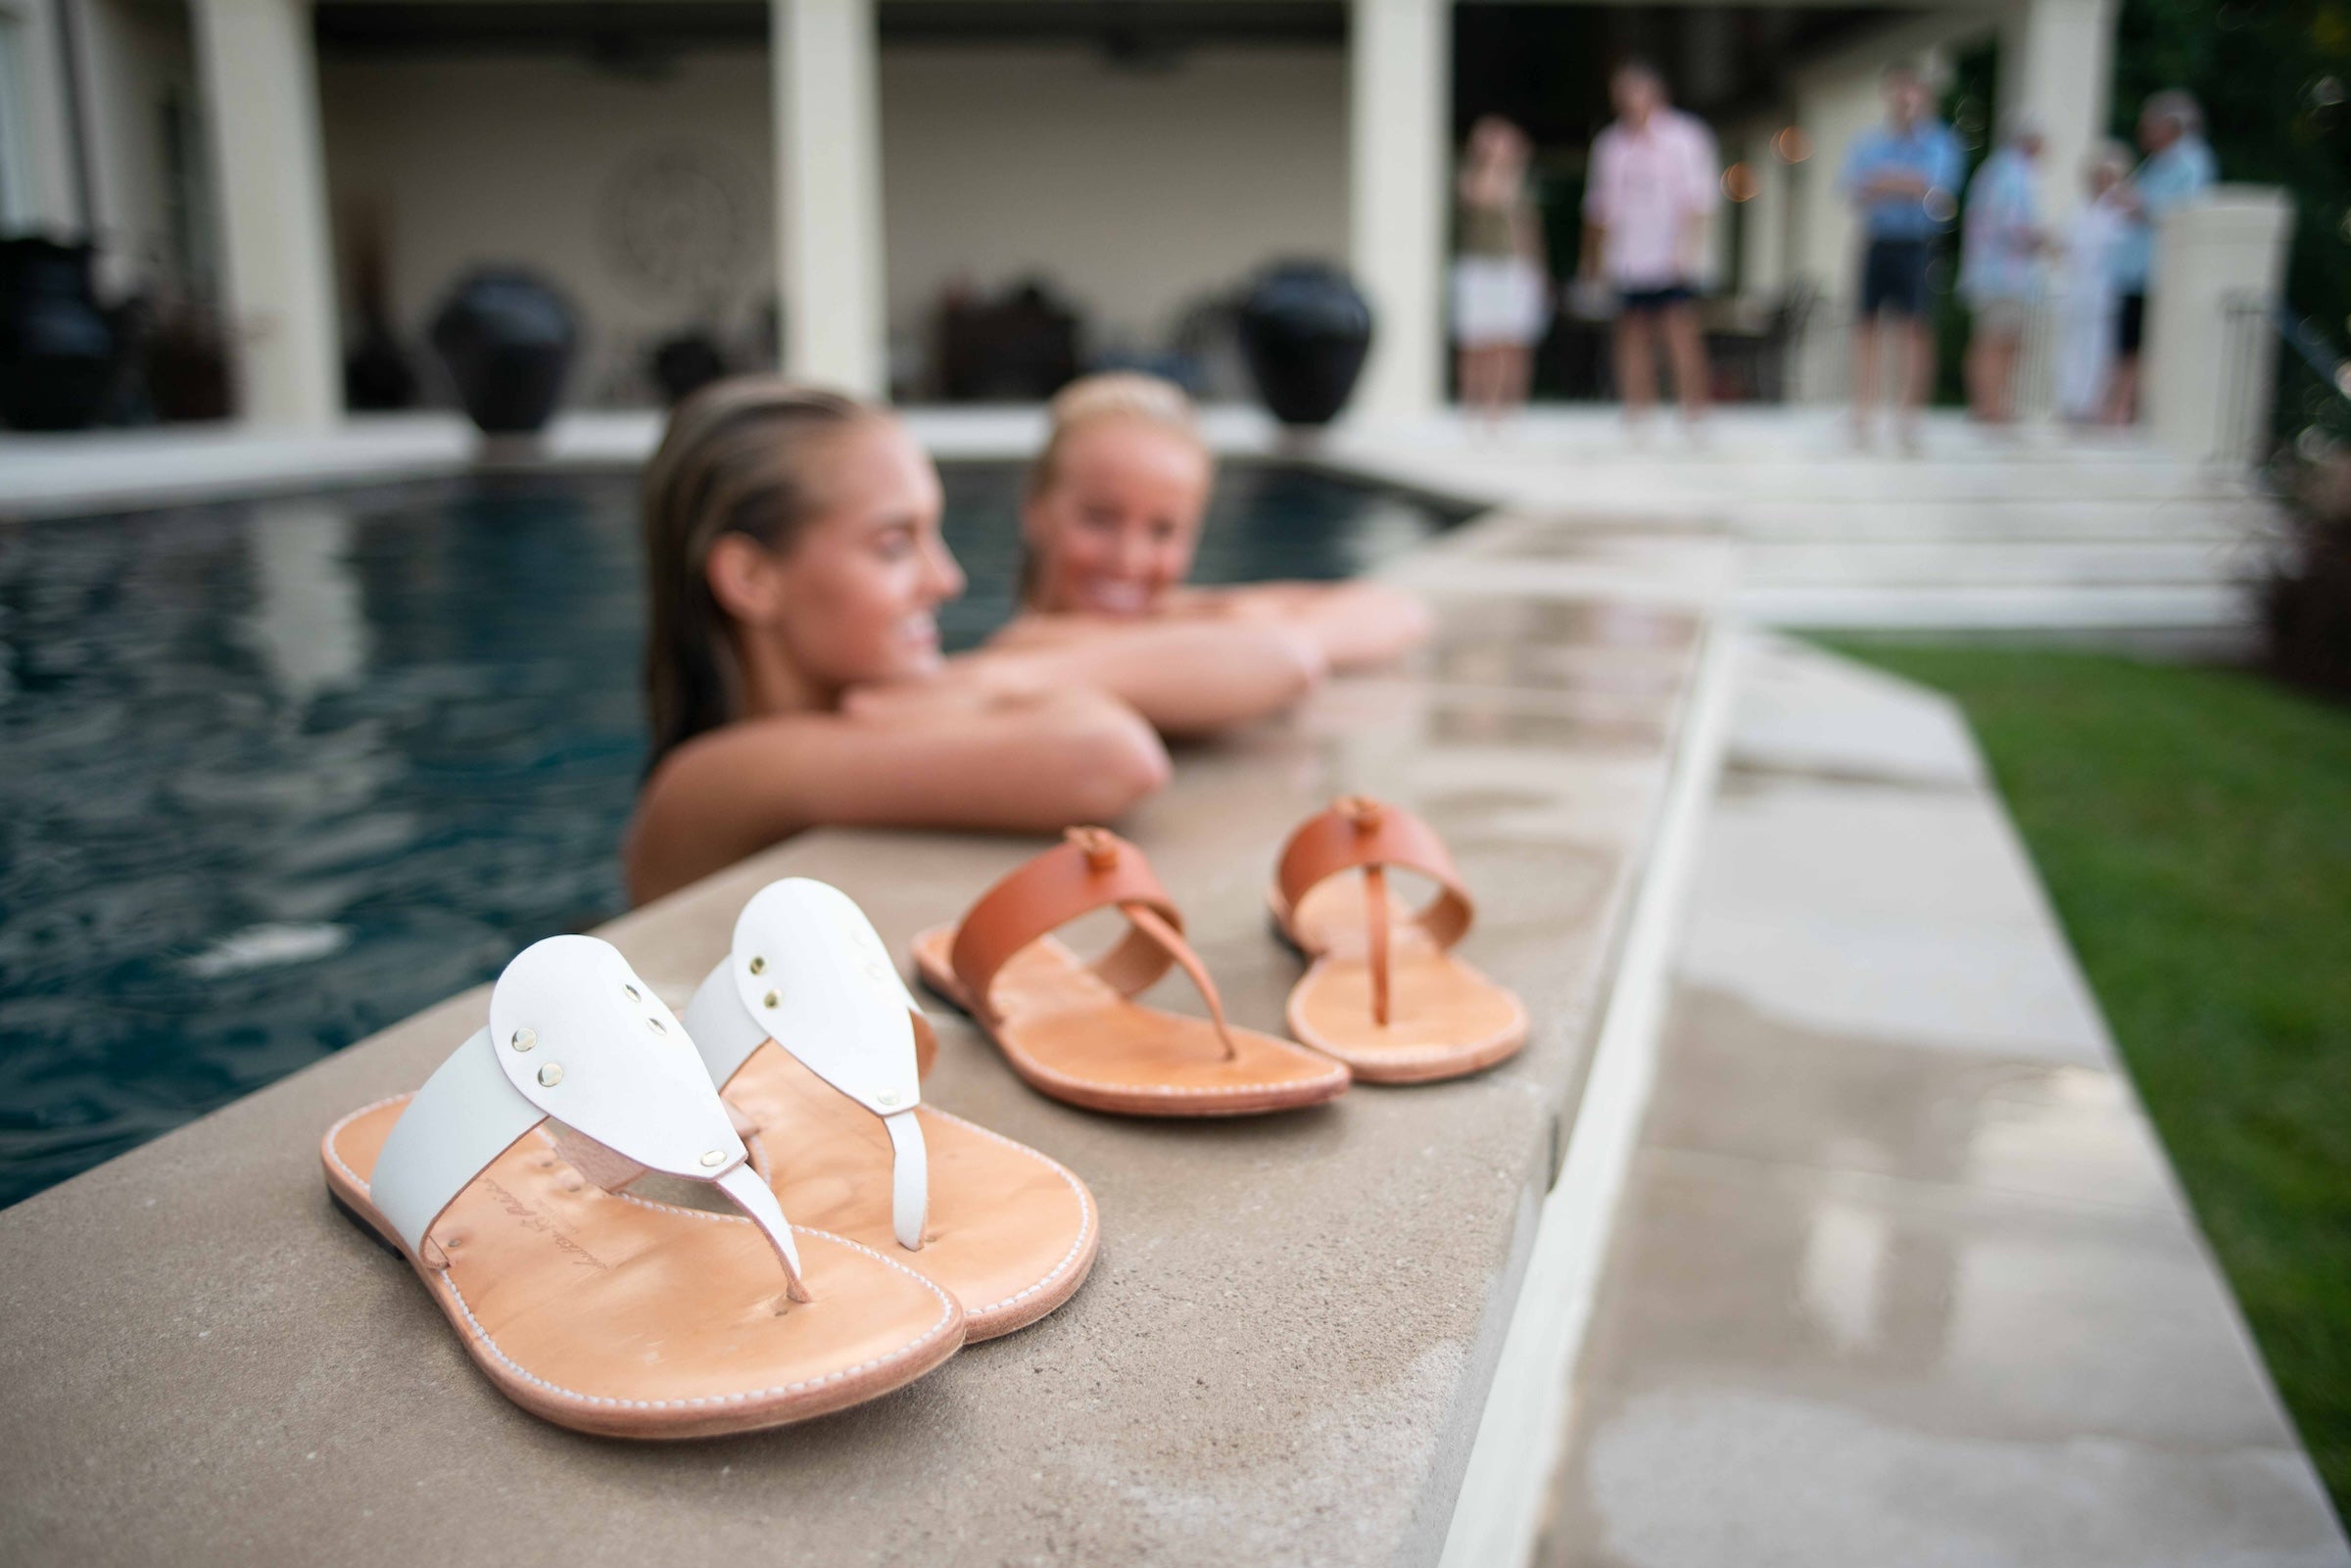 Ladies swimming, Sandals by the pool